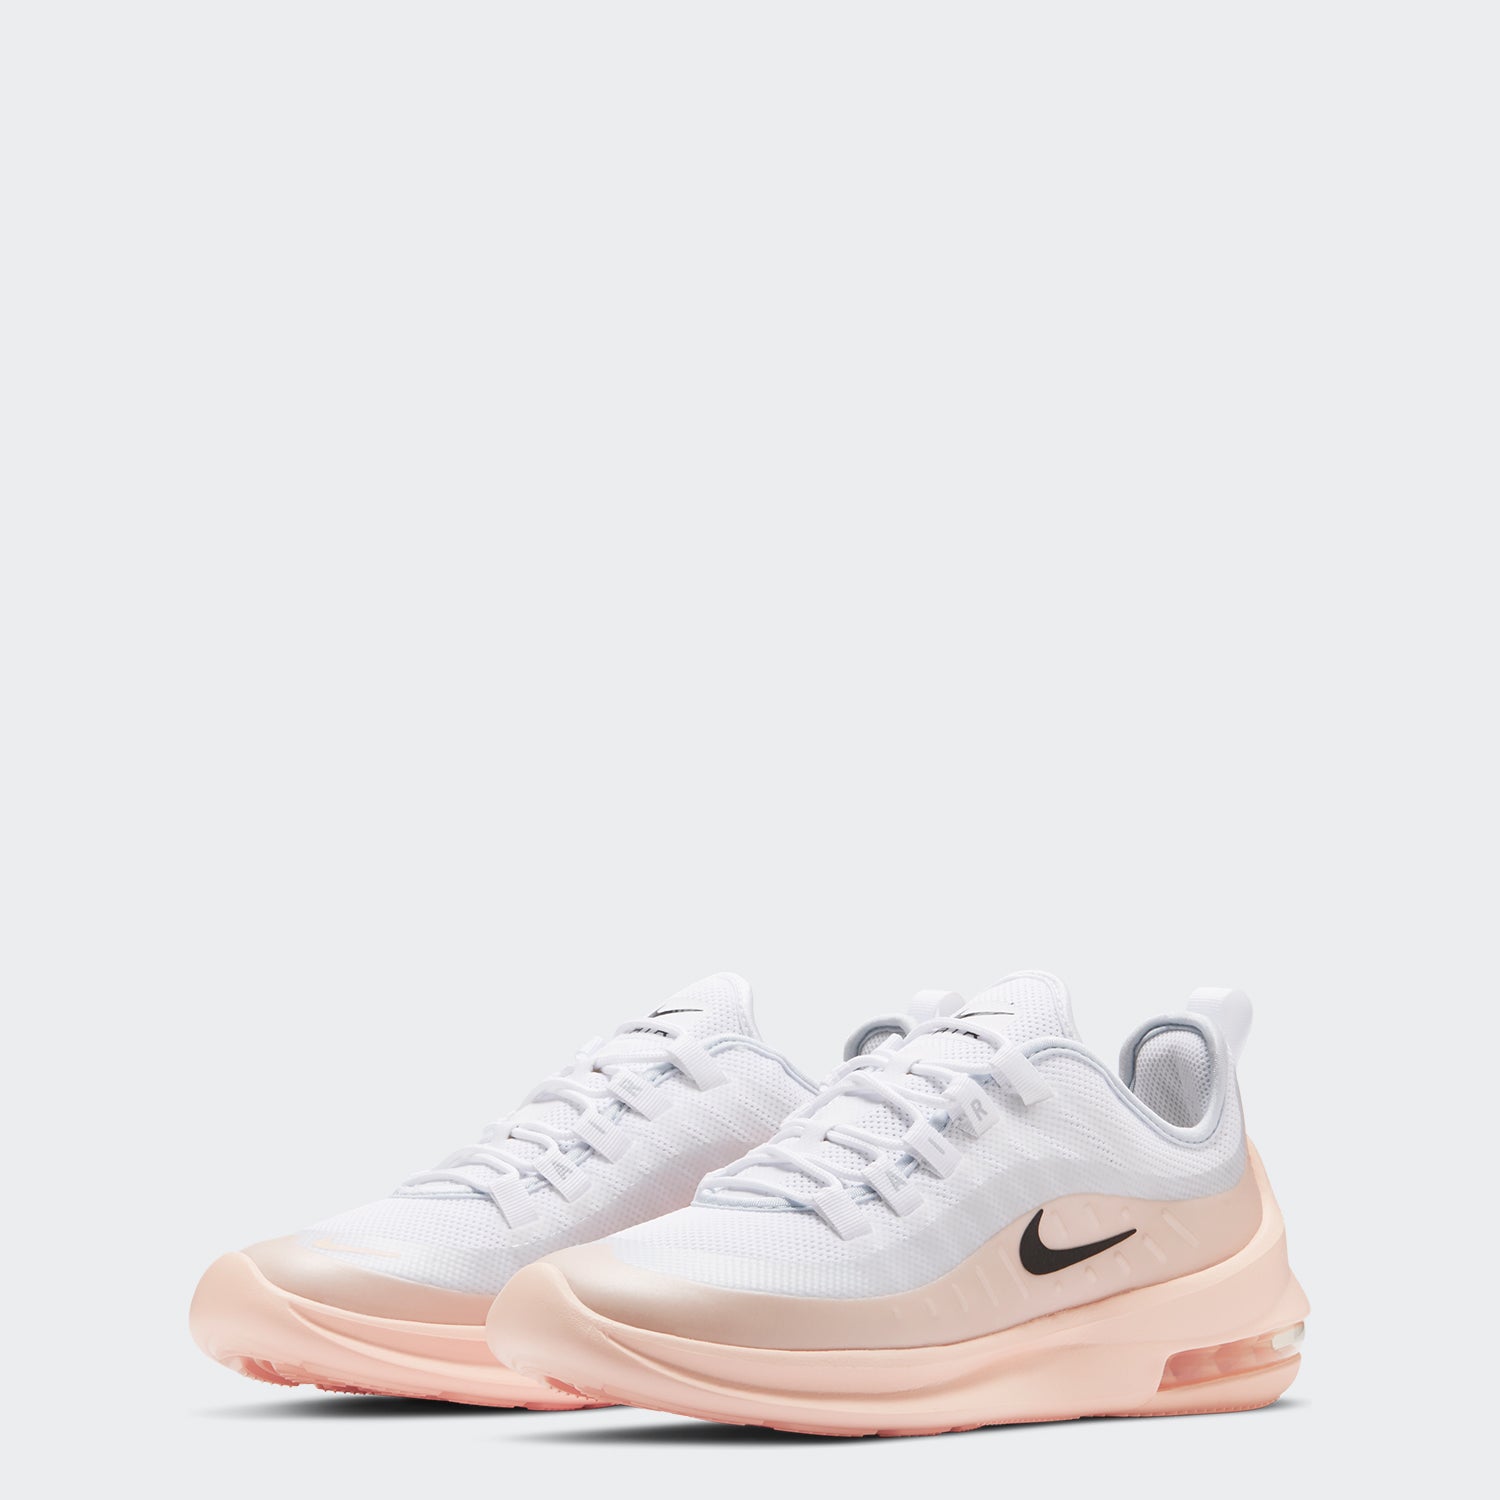 Nike Air Max Axis Shoes Washed Coral 